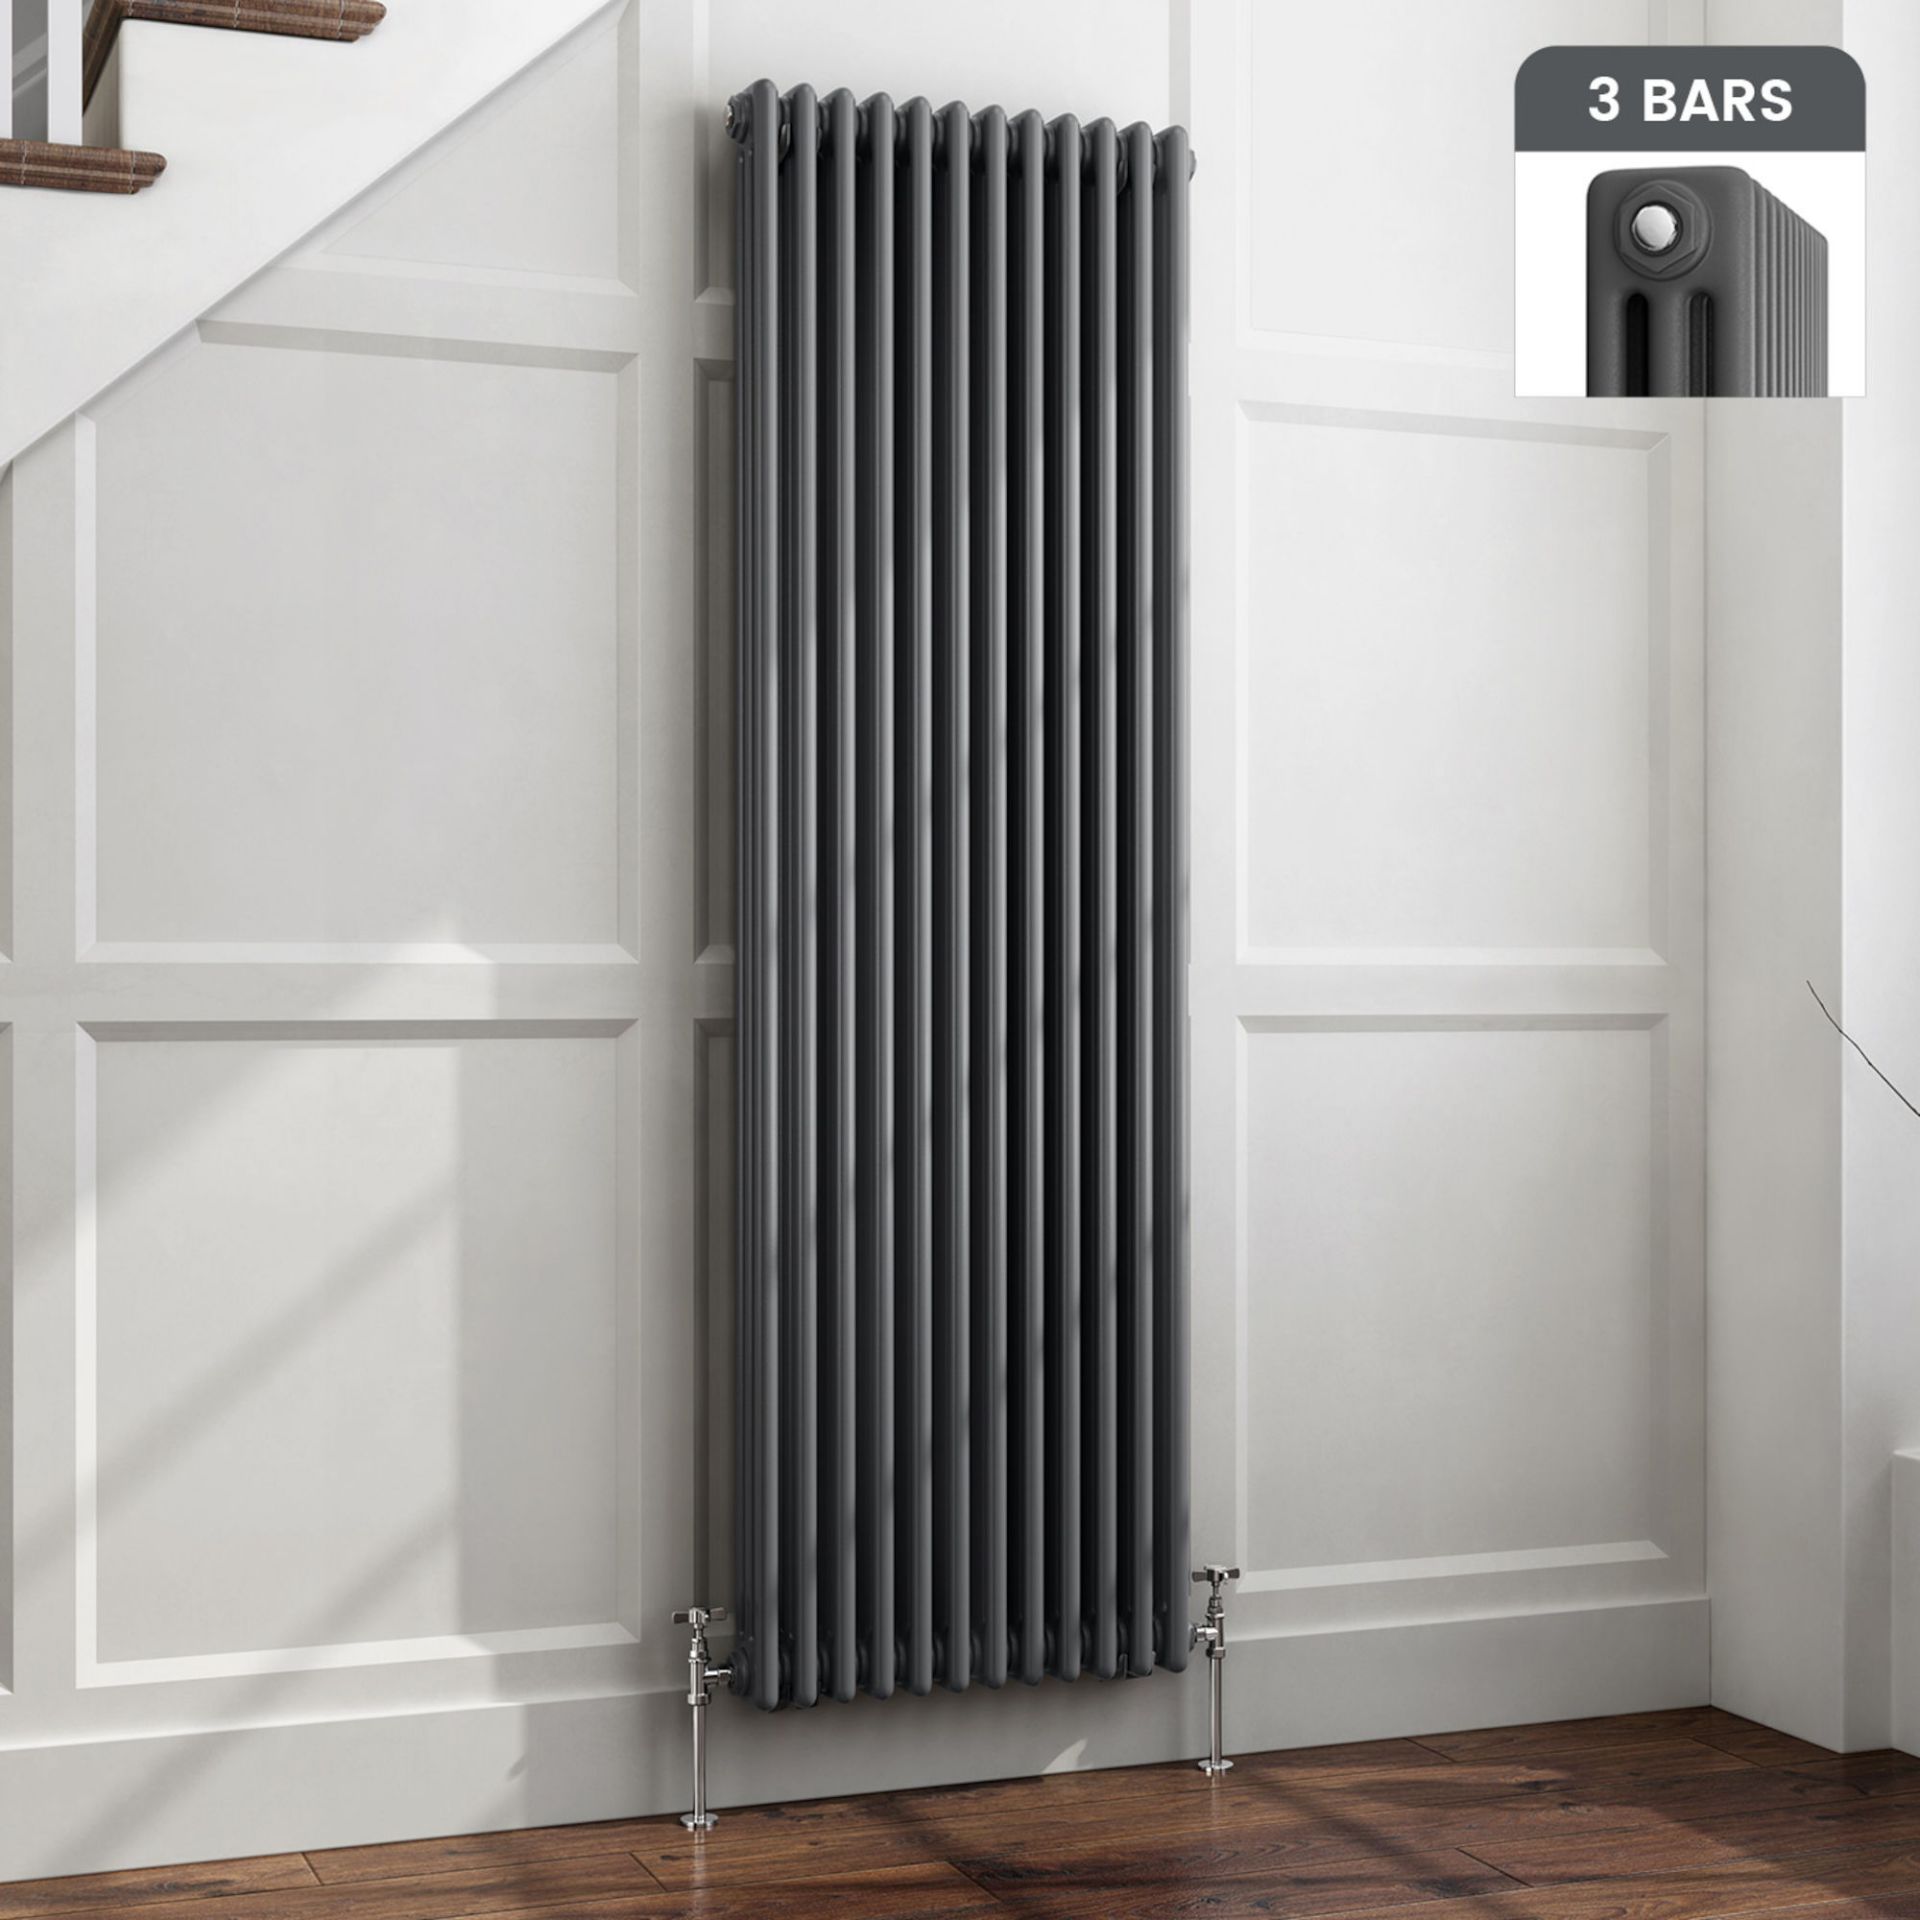 (CS19) 1800x558mm Anthracite Triple Panel Vertical Colosseum Traditional Radiator. RRP £619.99. Made